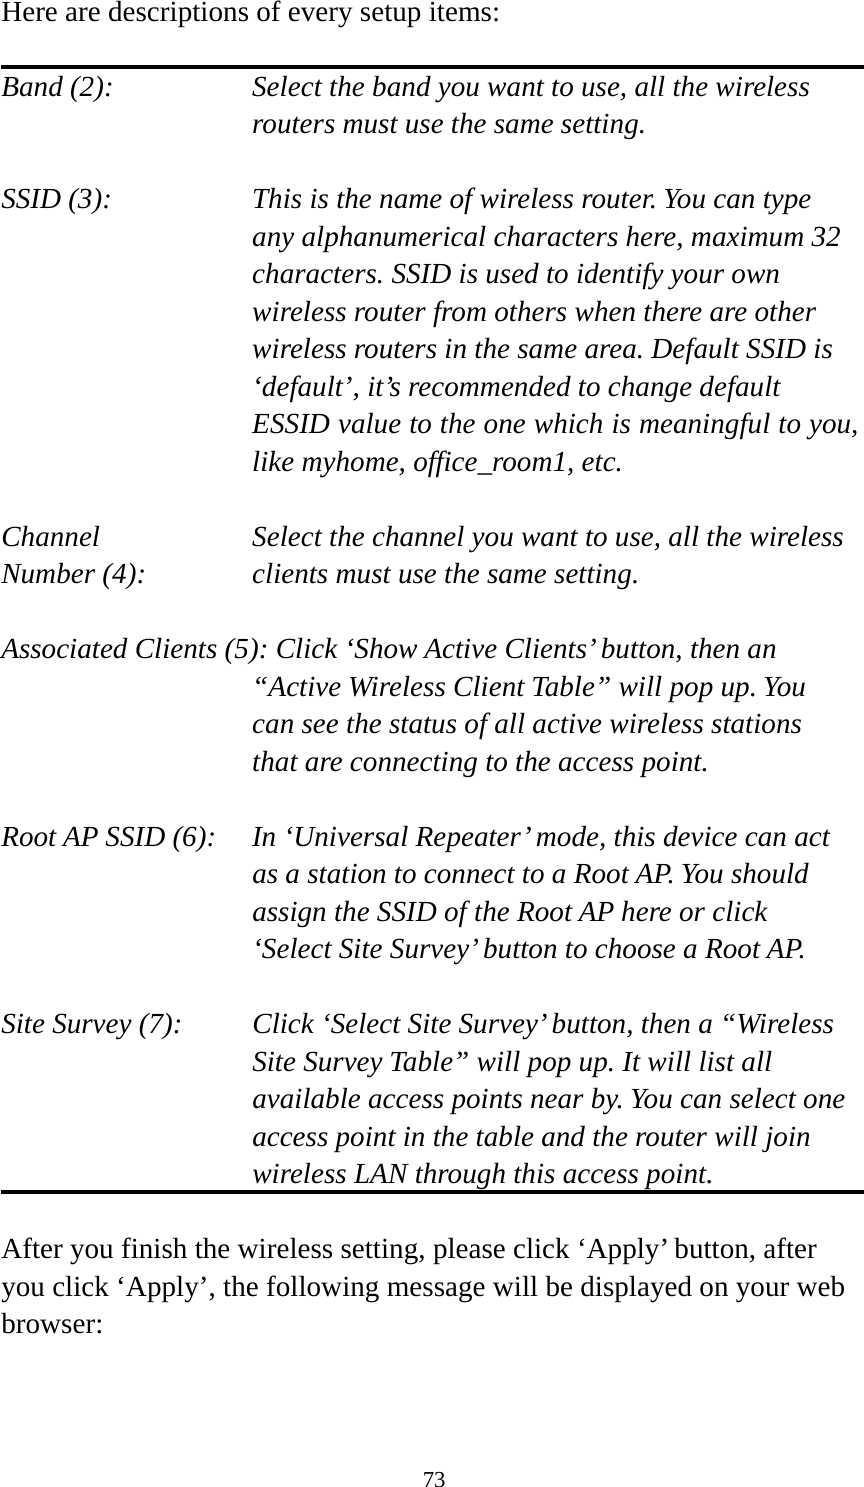 73 Here are descriptions of every setup items:  Band (2):  Select the band you want to use, all the wireless routers must use the same setting.  SSID (3):  This is the name of wireless router. You can type any alphanumerical characters here, maximum 32 characters. SSID is used to identify your own wireless router from others when there are other wireless routers in the same area. Default SSID is ‘default’, it’s recommended to change default ESSID value to the one which is meaningful to you, like myhome, office_room1, etc.  Channel  Select the channel you want to use, all the wireless Number (4):  clients must use the same setting.  Associated Clients (5): Click ‘Show Active Clients’ button, then an “Active Wireless Client Table” will pop up. You can see the status of all active wireless stations that are connecting to the access point.  Root AP SSID (6):  In ‘Universal Repeater’ mode, this device can act as a station to connect to a Root AP. You should assign the SSID of the Root AP here or click ‘Select Site Survey’ button to choose a Root AP.  Site Survey (7):  Click ‘Select Site Survey’ button, then a “Wireless Site Survey Table” will pop up. It will list all available access points near by. You can select one access point in the table and the router will join wireless LAN through this access point.  After you finish the wireless setting, please click ‘Apply’ button, after you click ‘Apply’, the following message will be displayed on your web browser:  